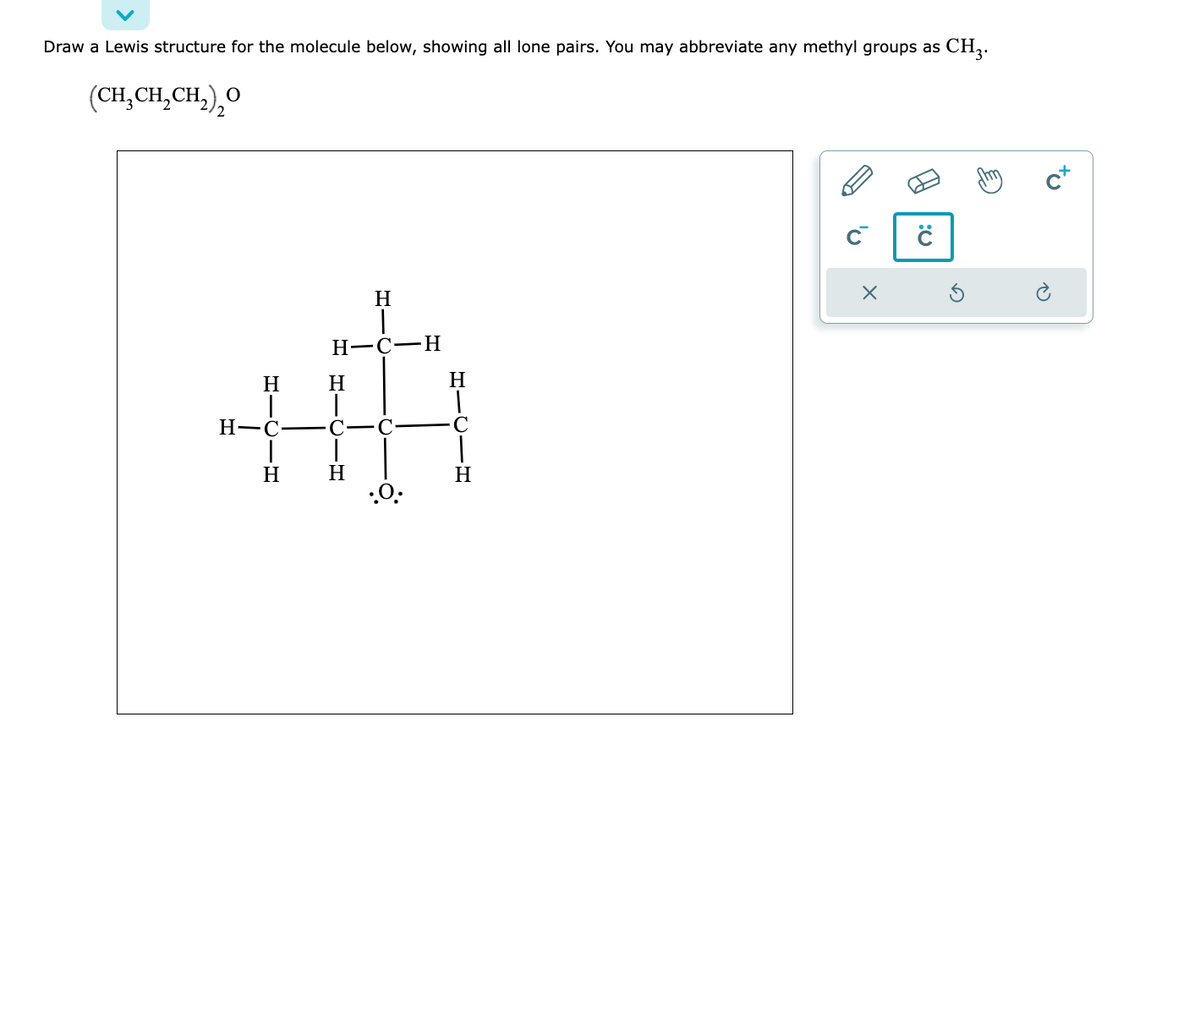 Draw a Lewis structure for the molecule below, showing all lone pairs. You may abbreviate any methyl groups as CH₂.
(CH₂CH₂CH₂)₂20
H
H-C-
-H
H
H
T
H-C-H
HICIH
Η
C-C
-Ω
H
.O.
H
C
H
X
Q: